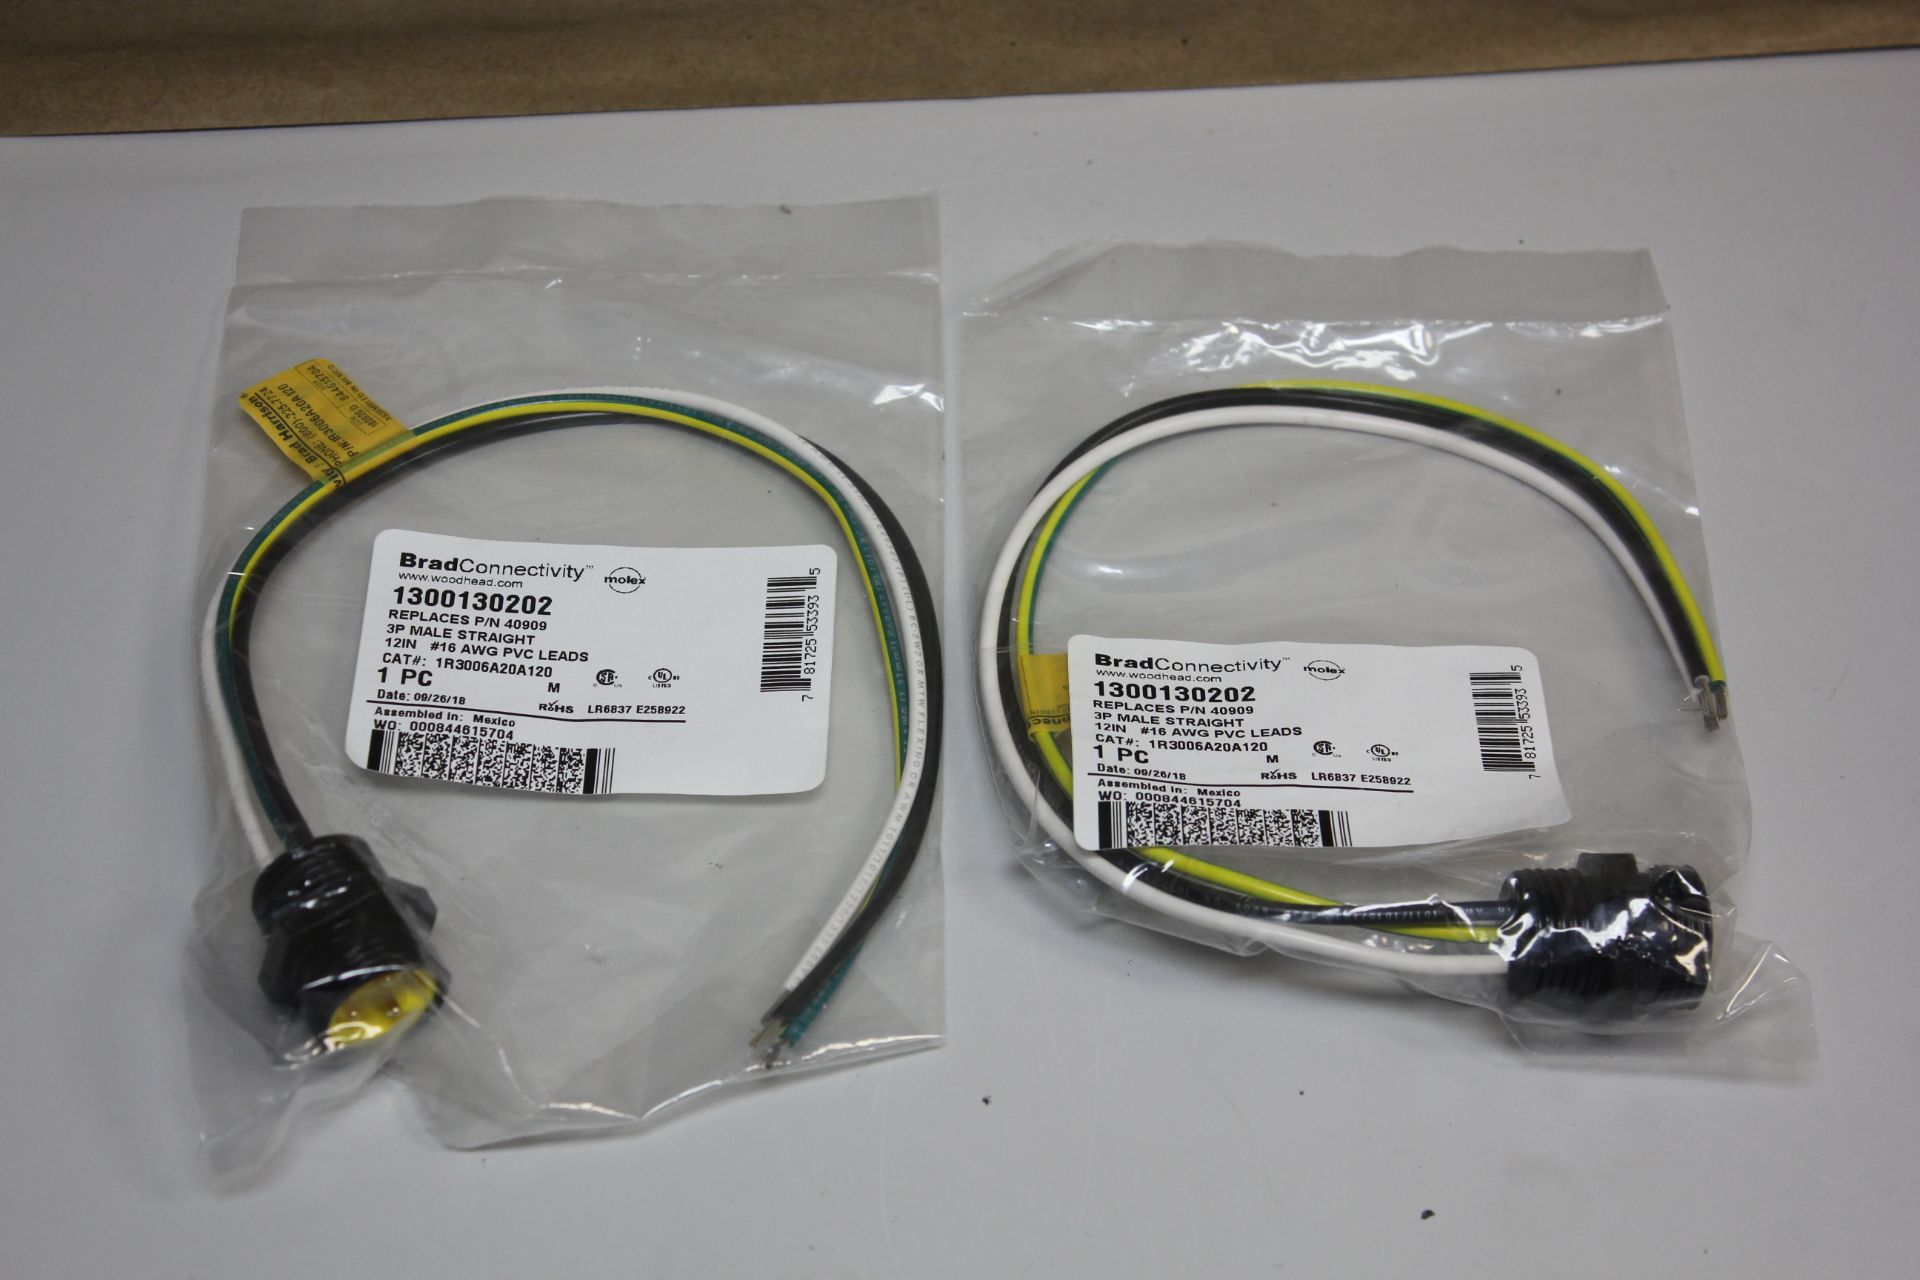 LOT OF 2 NEW BRAD CONNECTIVITY WOODHEAD 3P MALE STRAIGHT CABLES